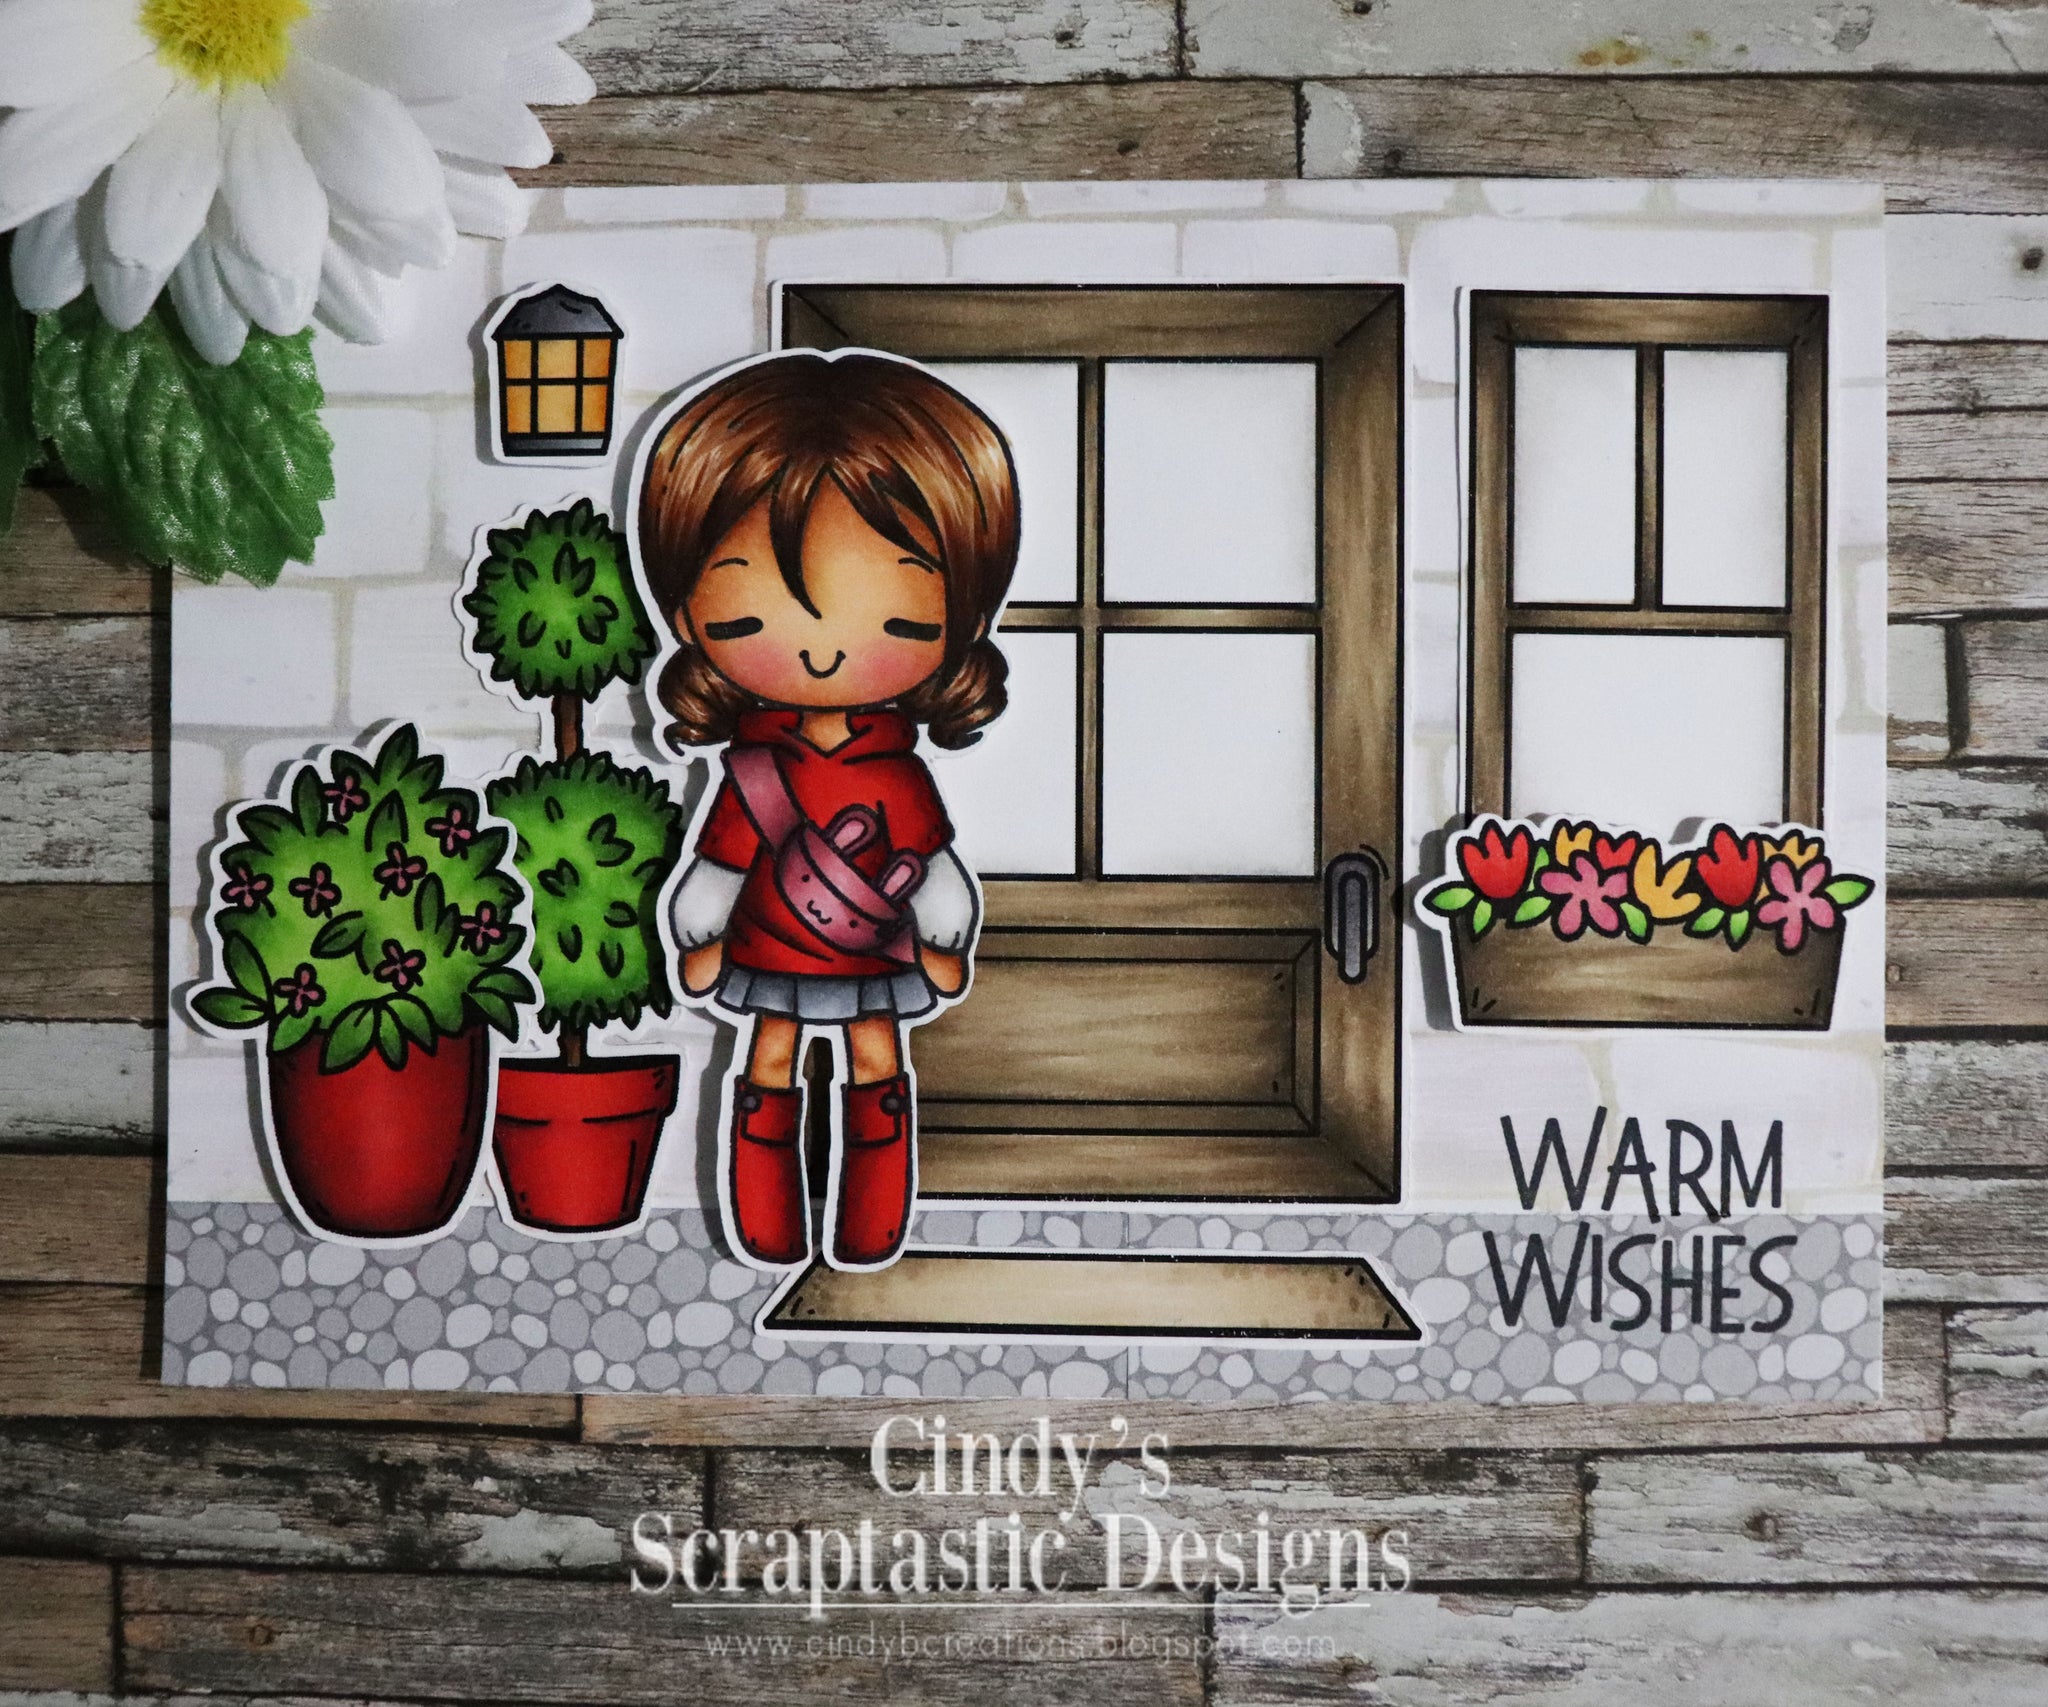 Warm Wishes from our Guest Designer Cindy Beland!